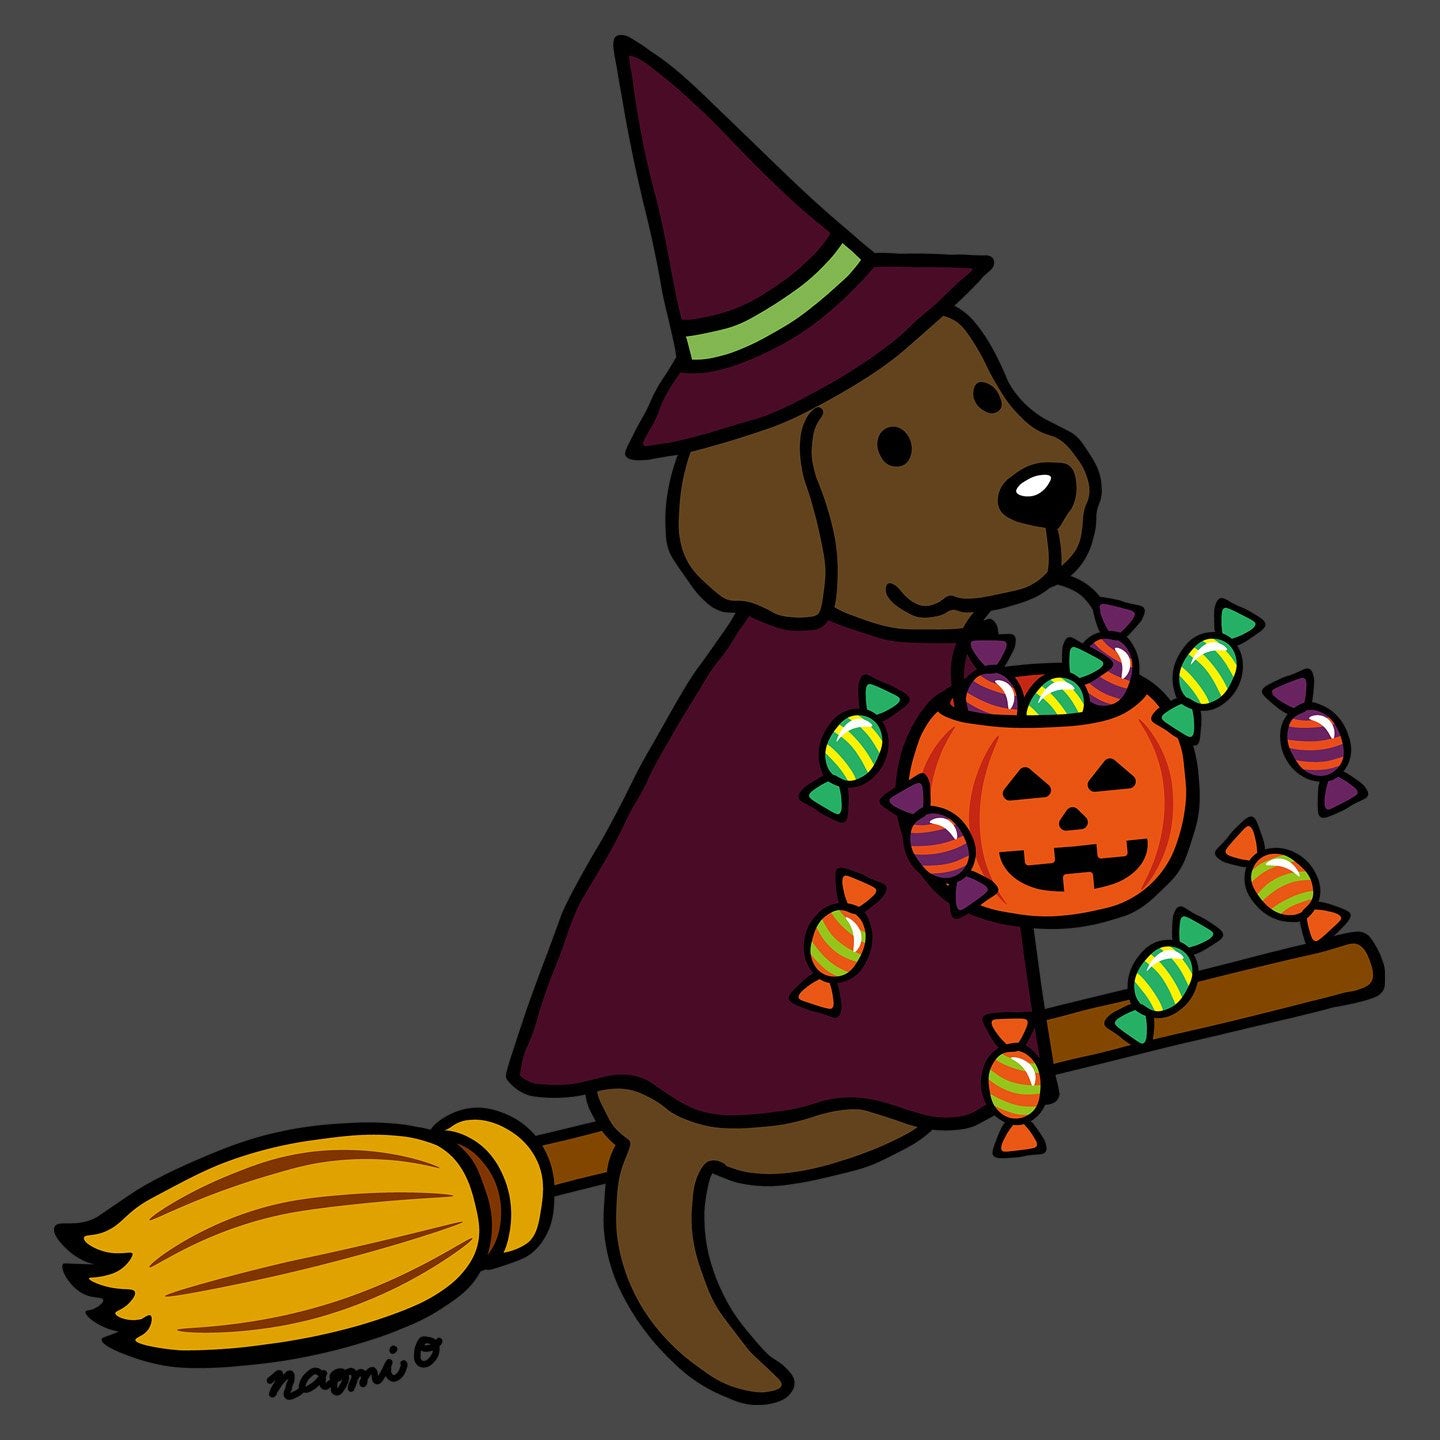 Chocolate Lab Witch - Adult Unisex T-Shirt